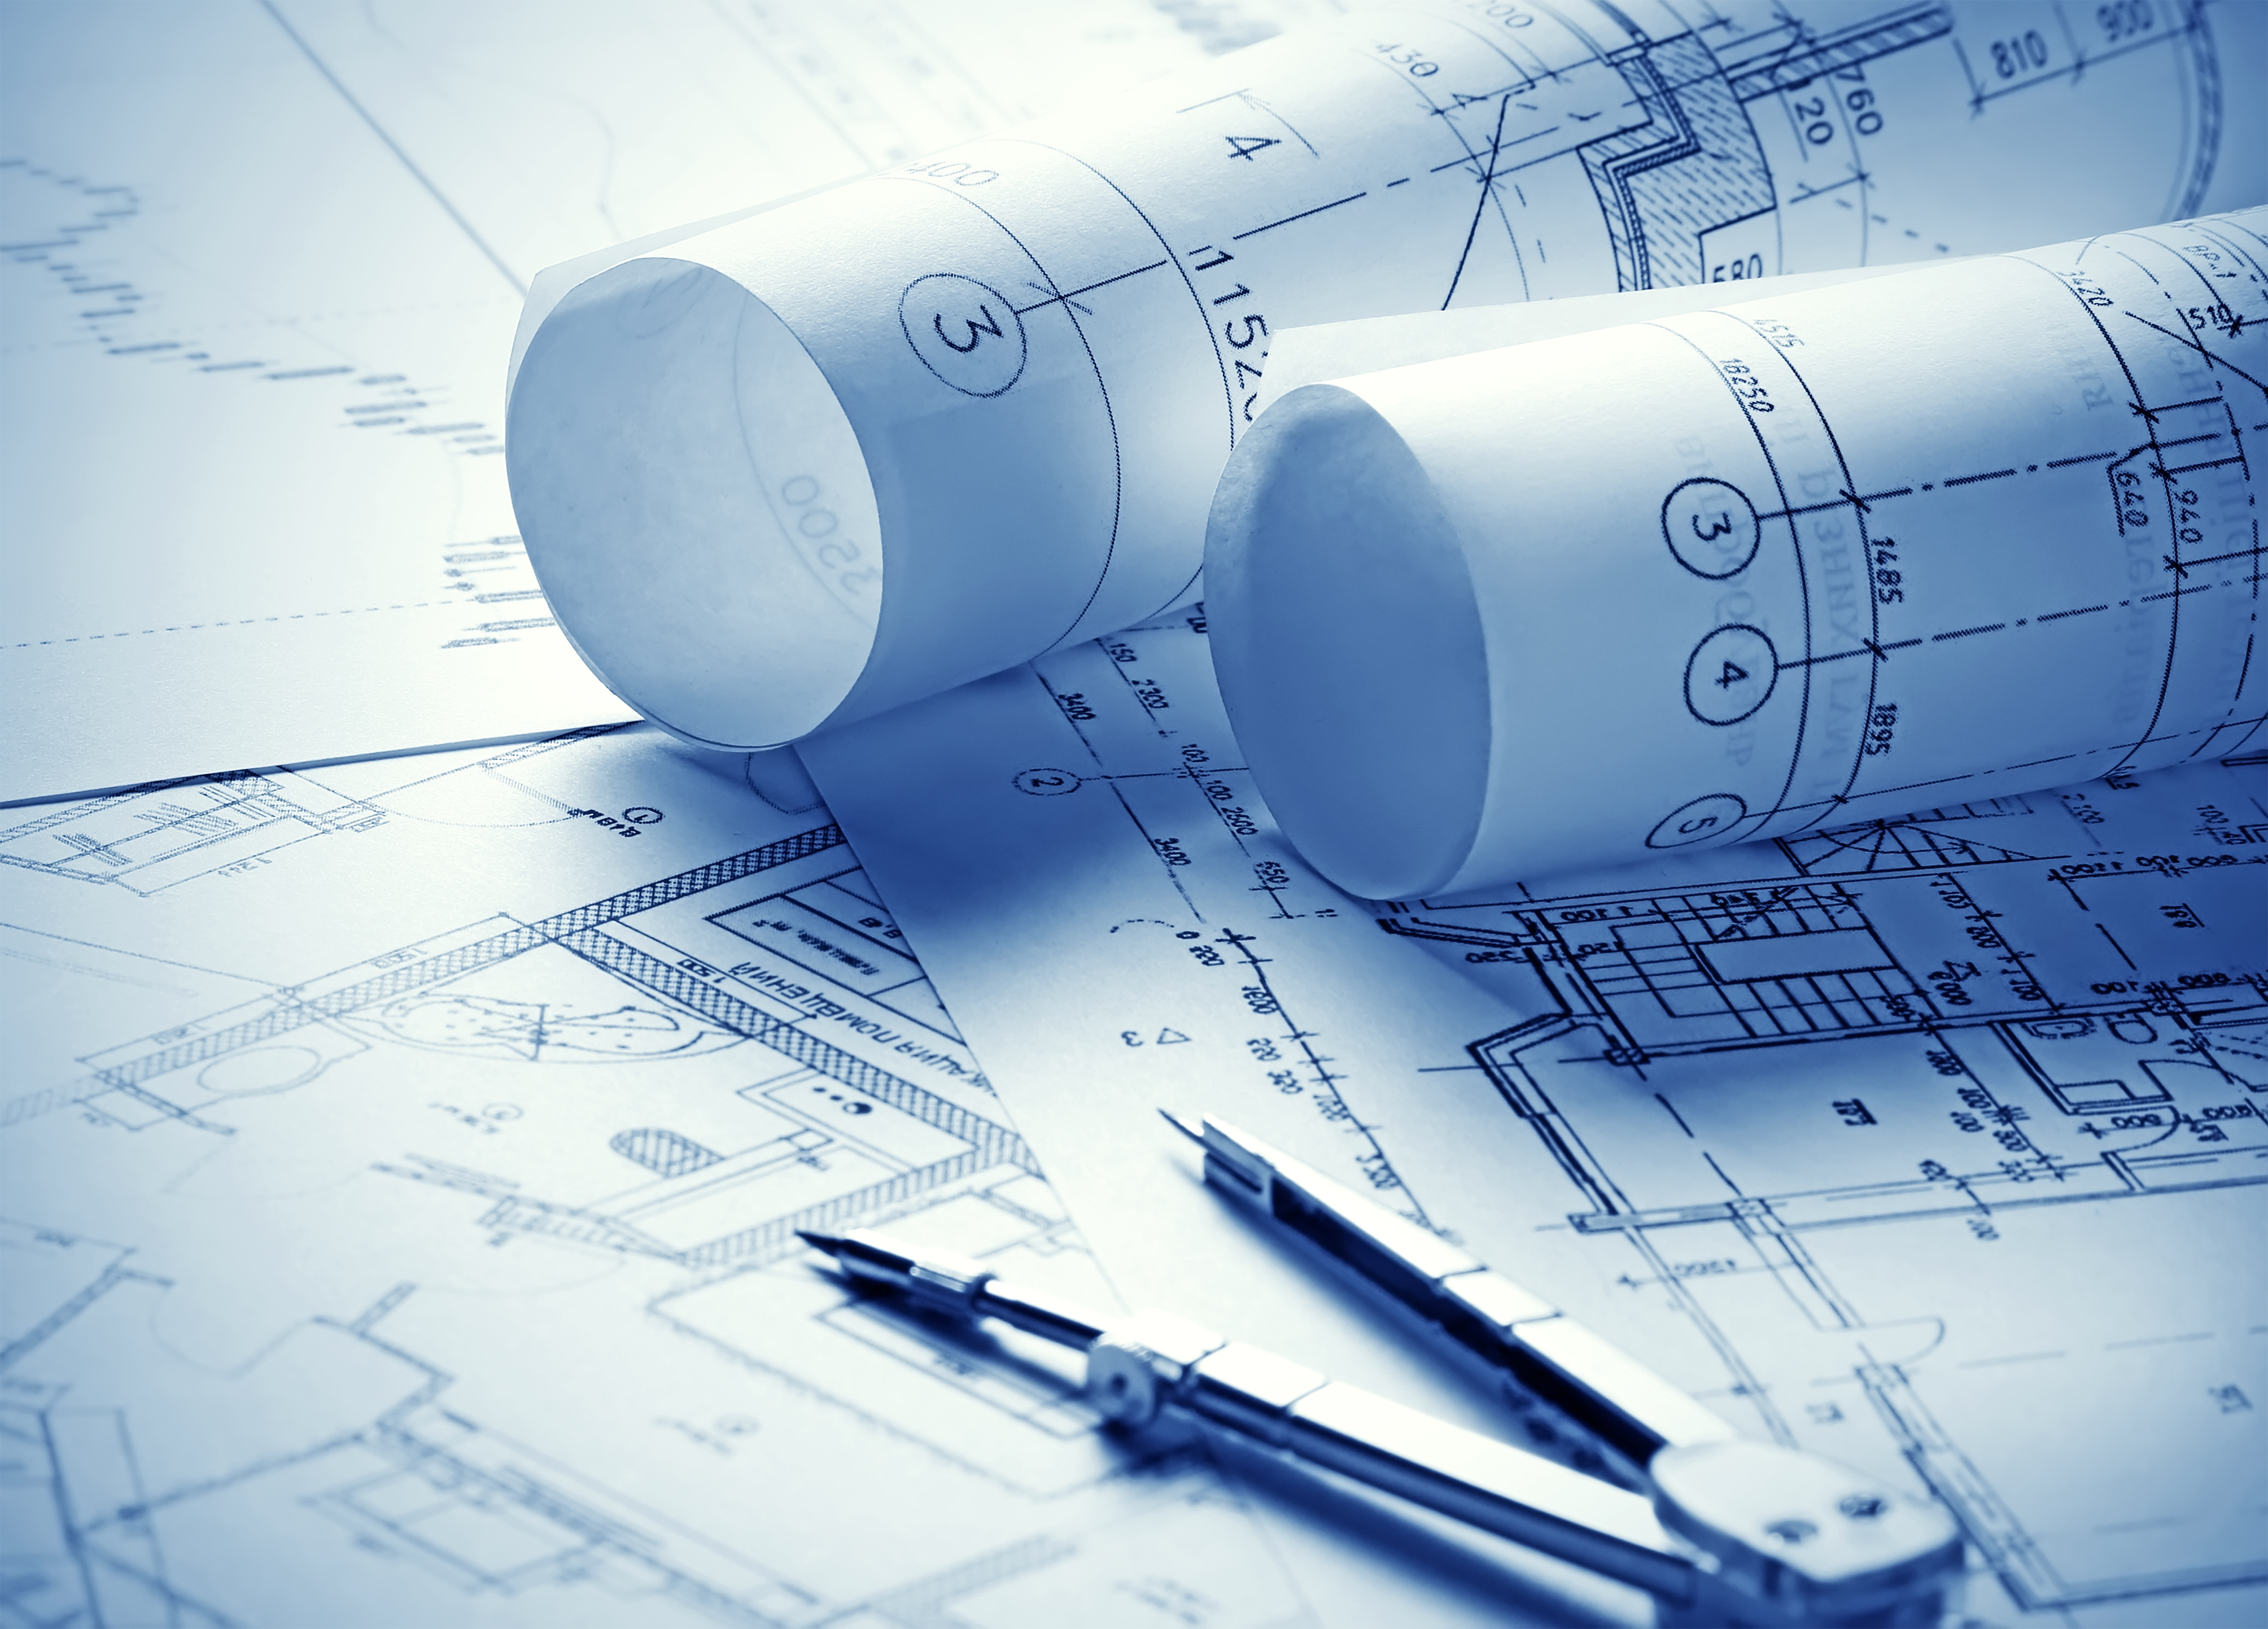 civil engineering wallpaper gallery,technical drawing,drawing,cylinder,engineering